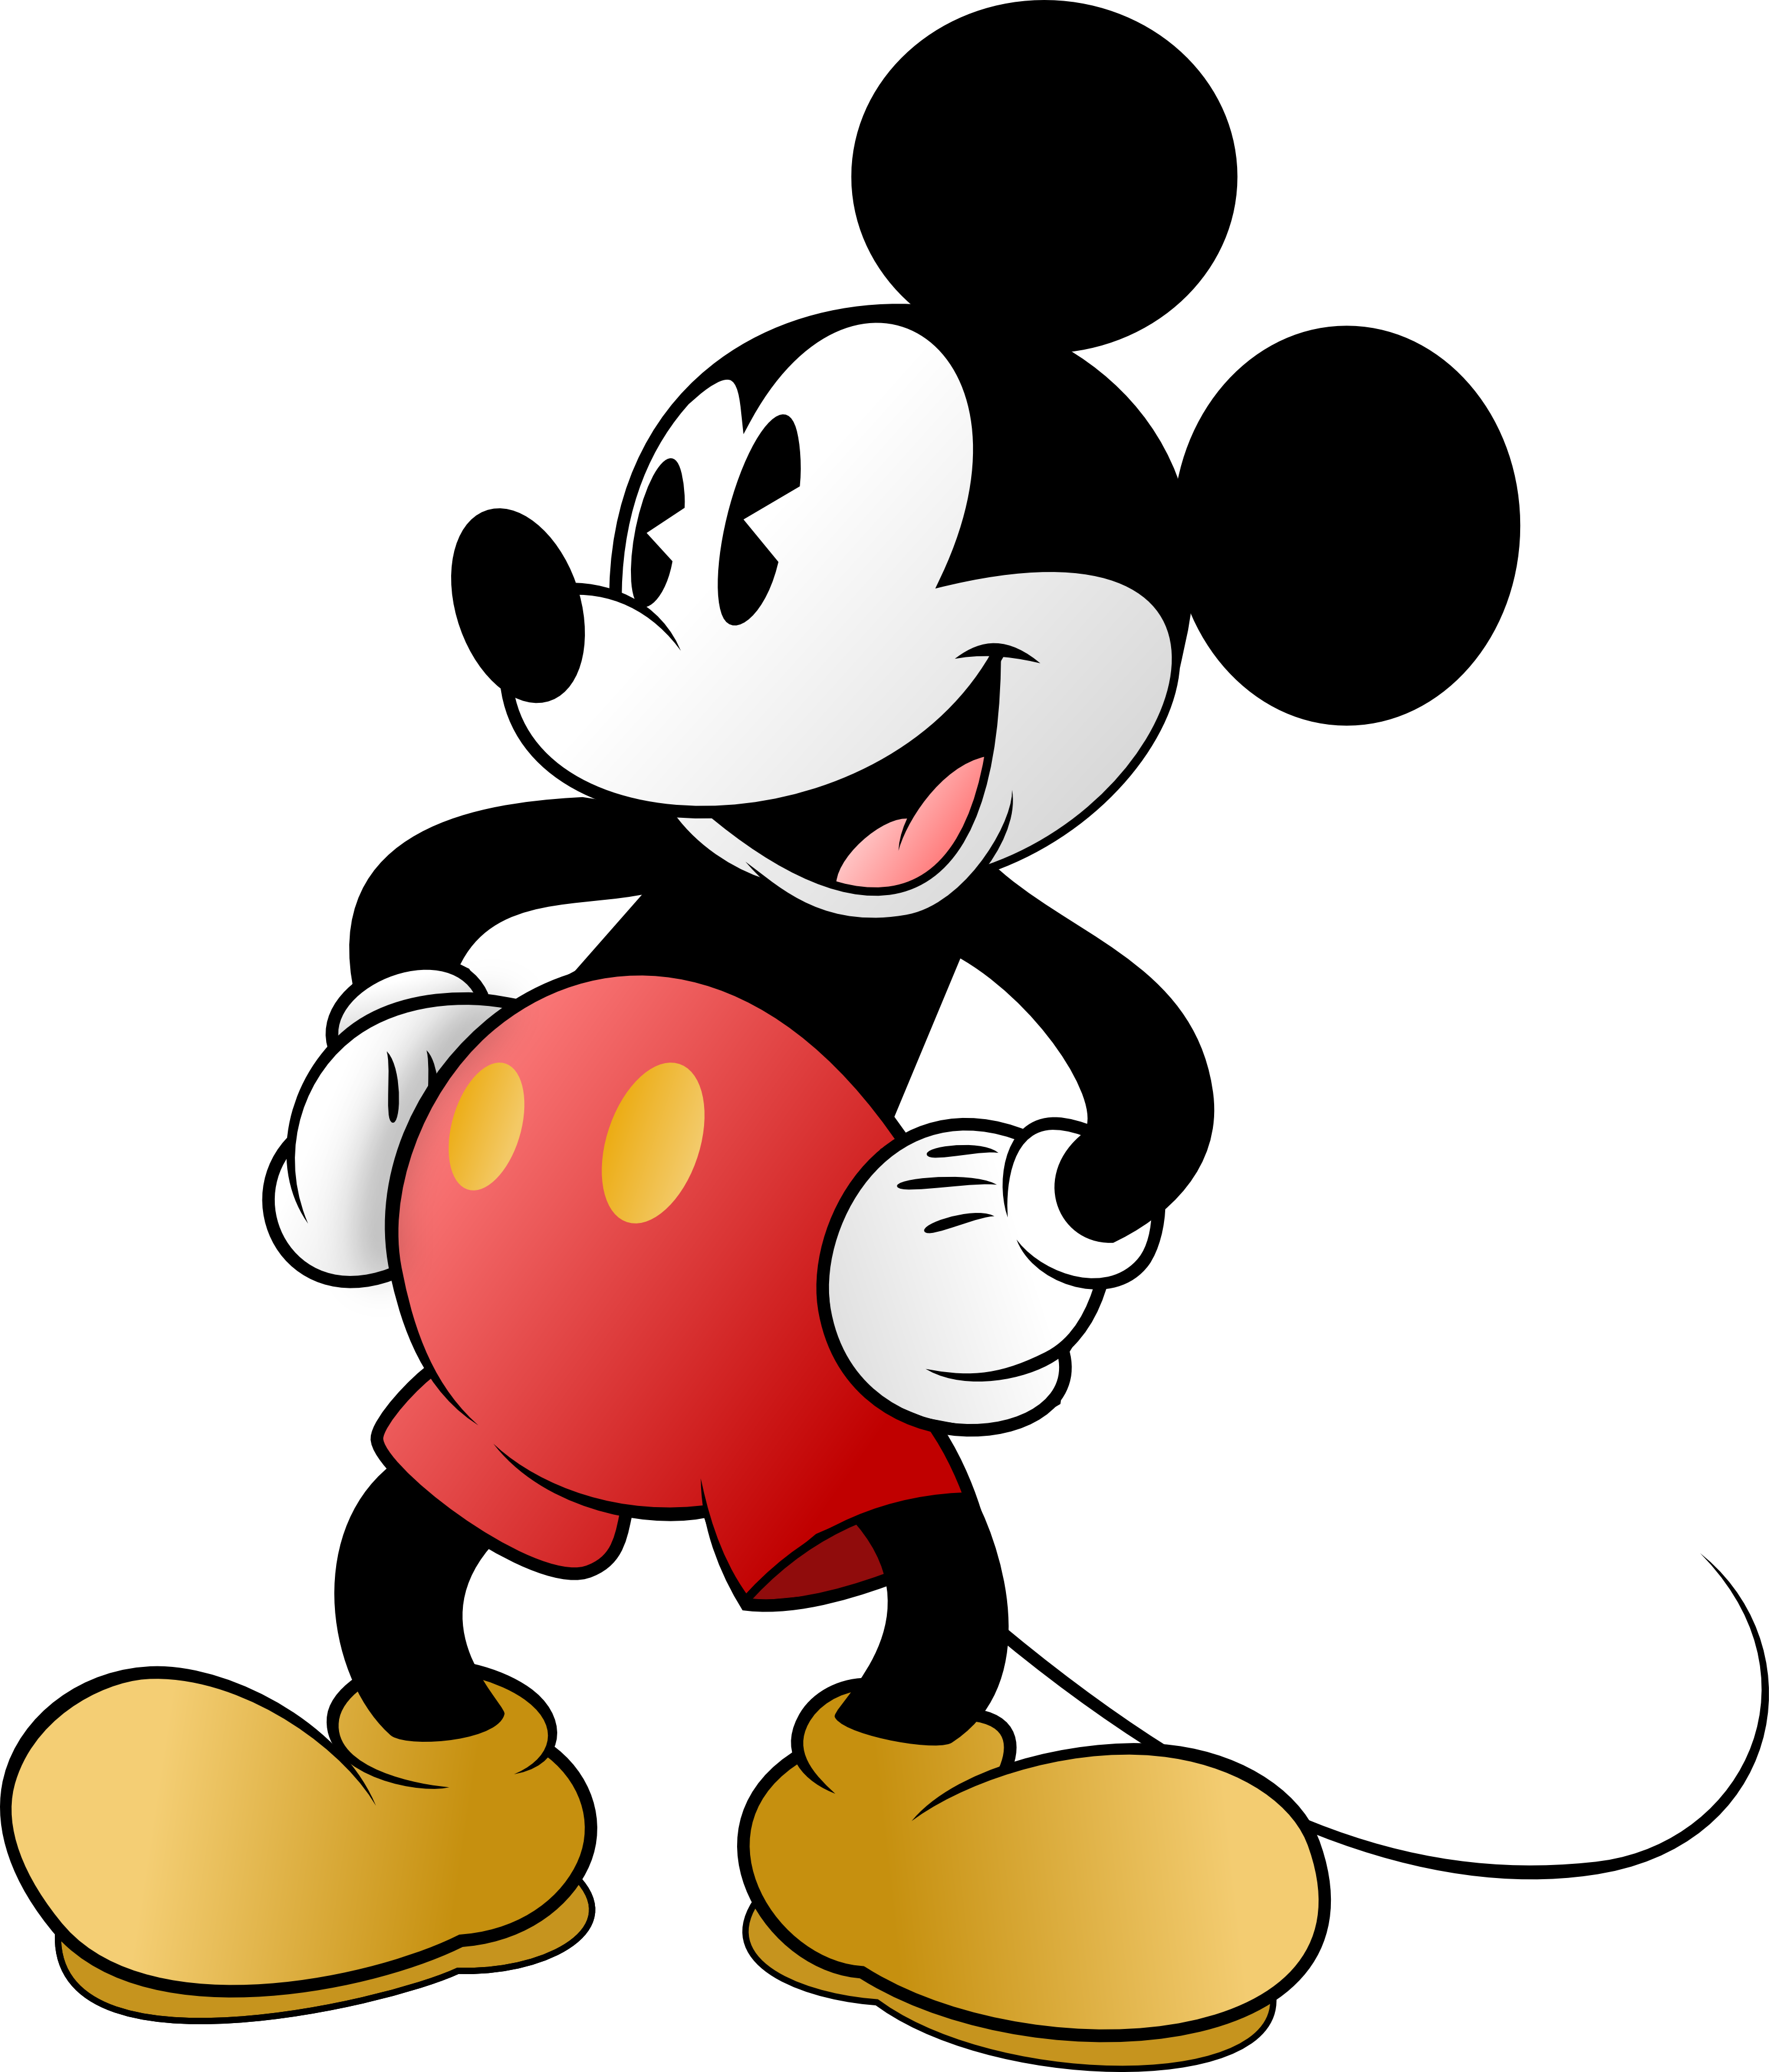 Mickey Mouse Hd PNG Image - PurePNG | Free transparent CC0 PNG Image